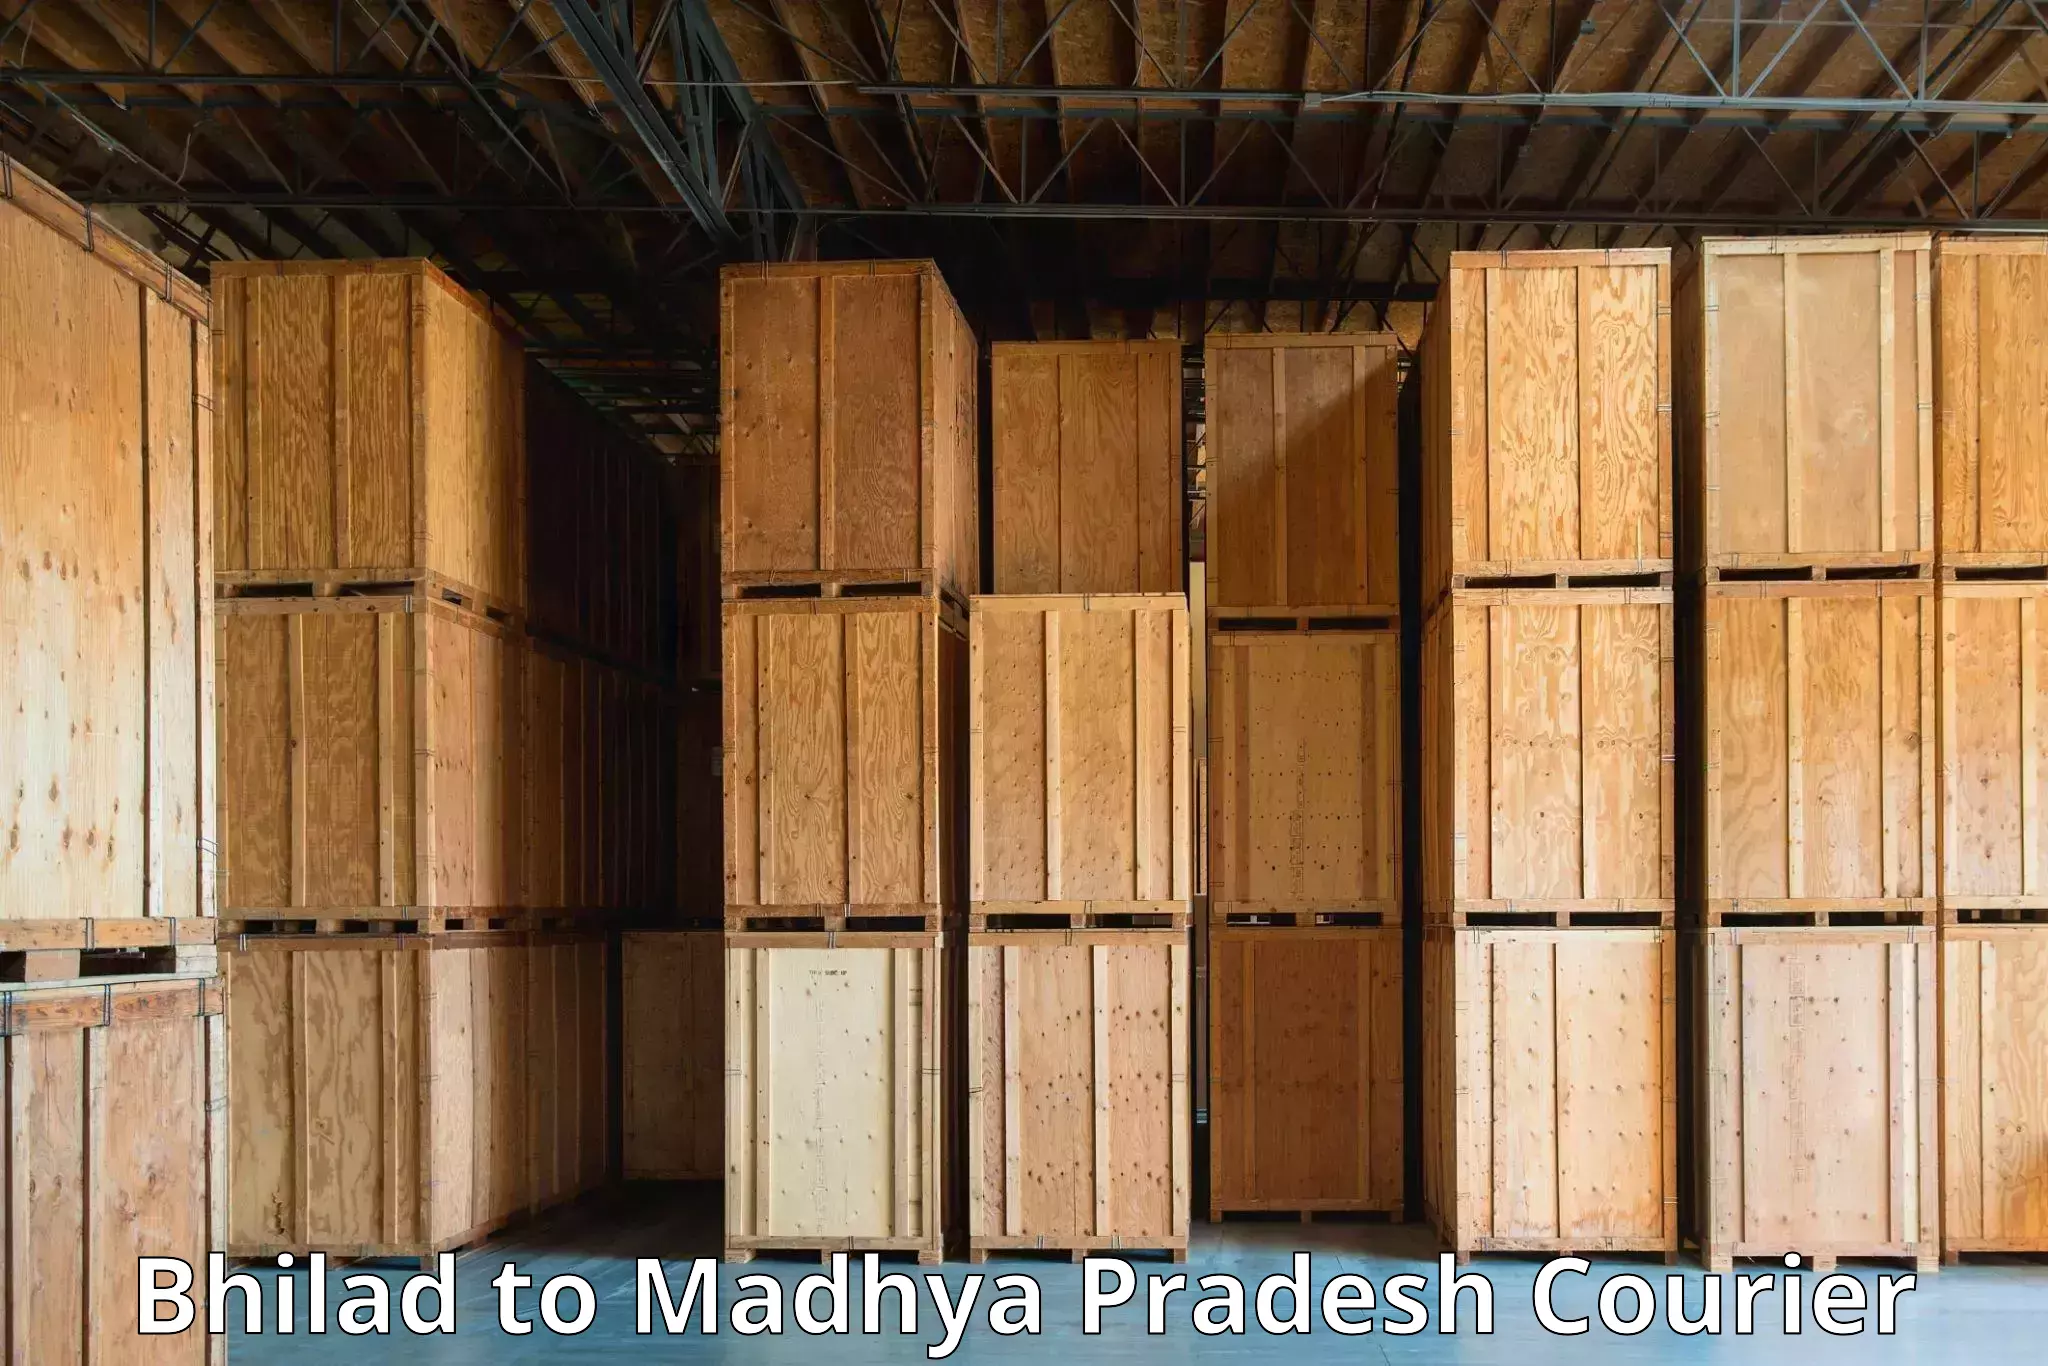 Courier service booking in Bhilad to Madhya Pradesh